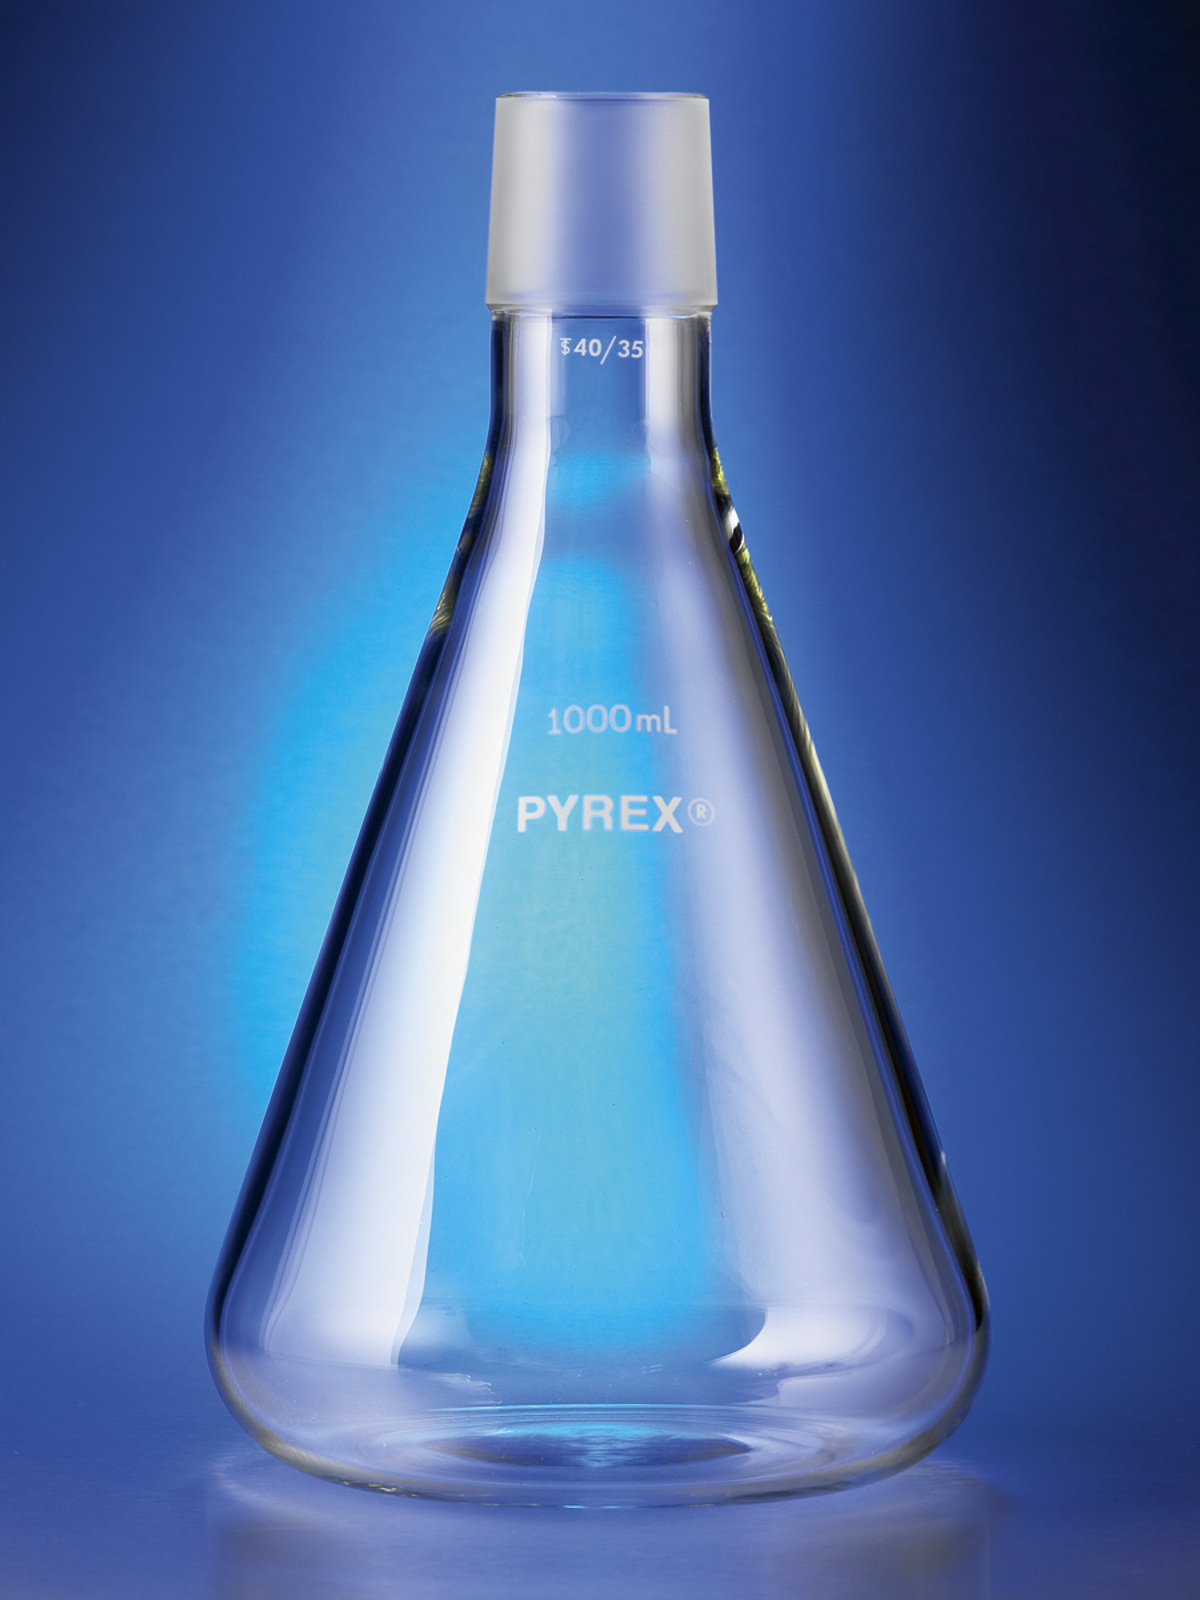 33985-4L | PYREX® 4000 mL Erlenmeyer Flask with 40/35 Standard